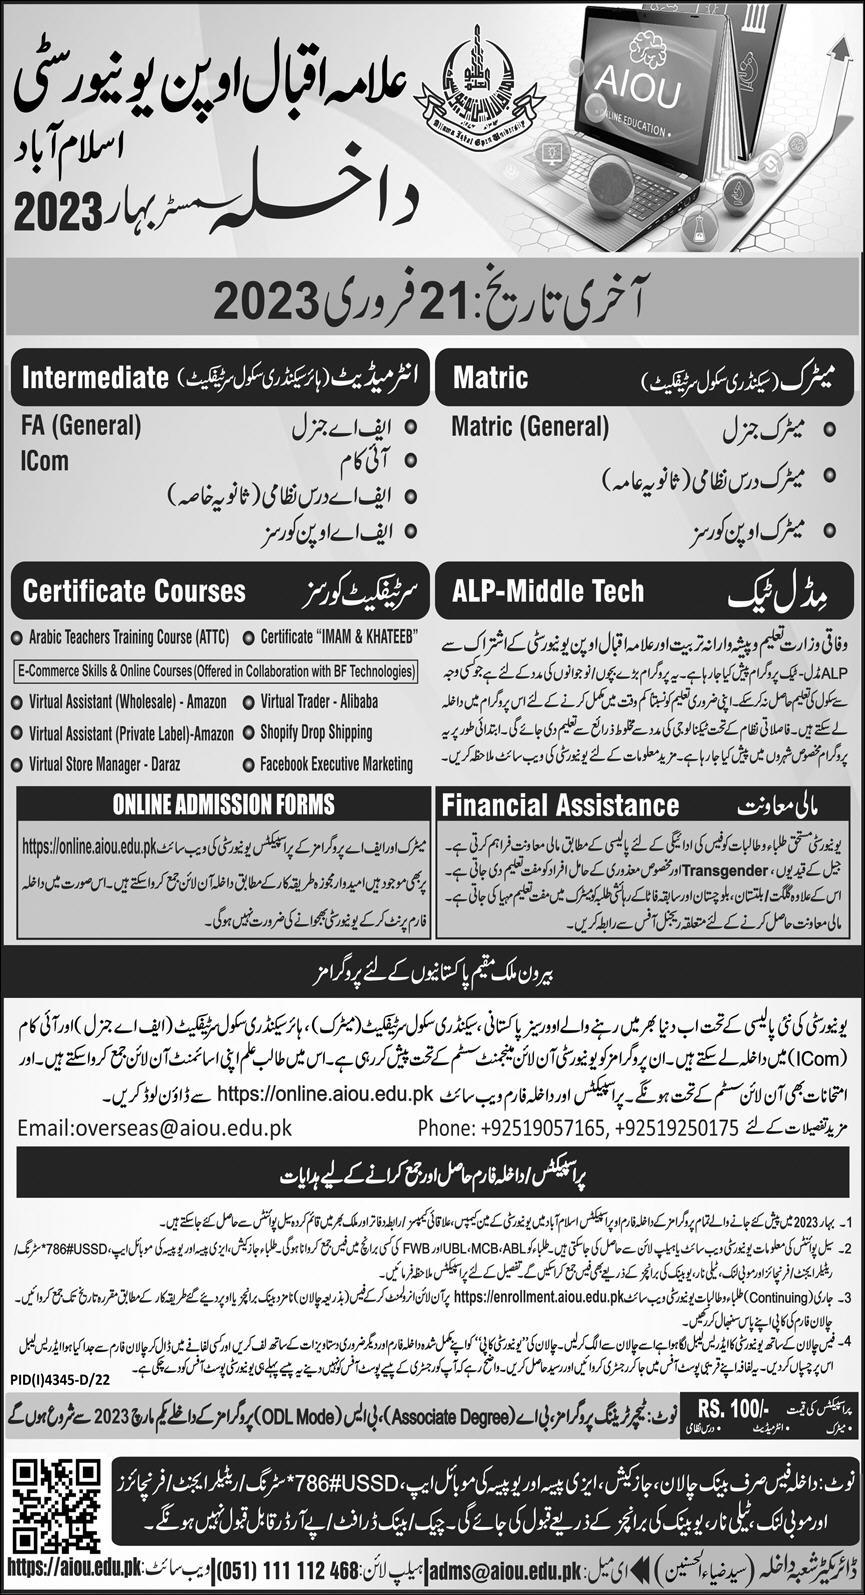 AIOU Matric Inter and Diploma Certificate (Phase I) Admission Spring 2022